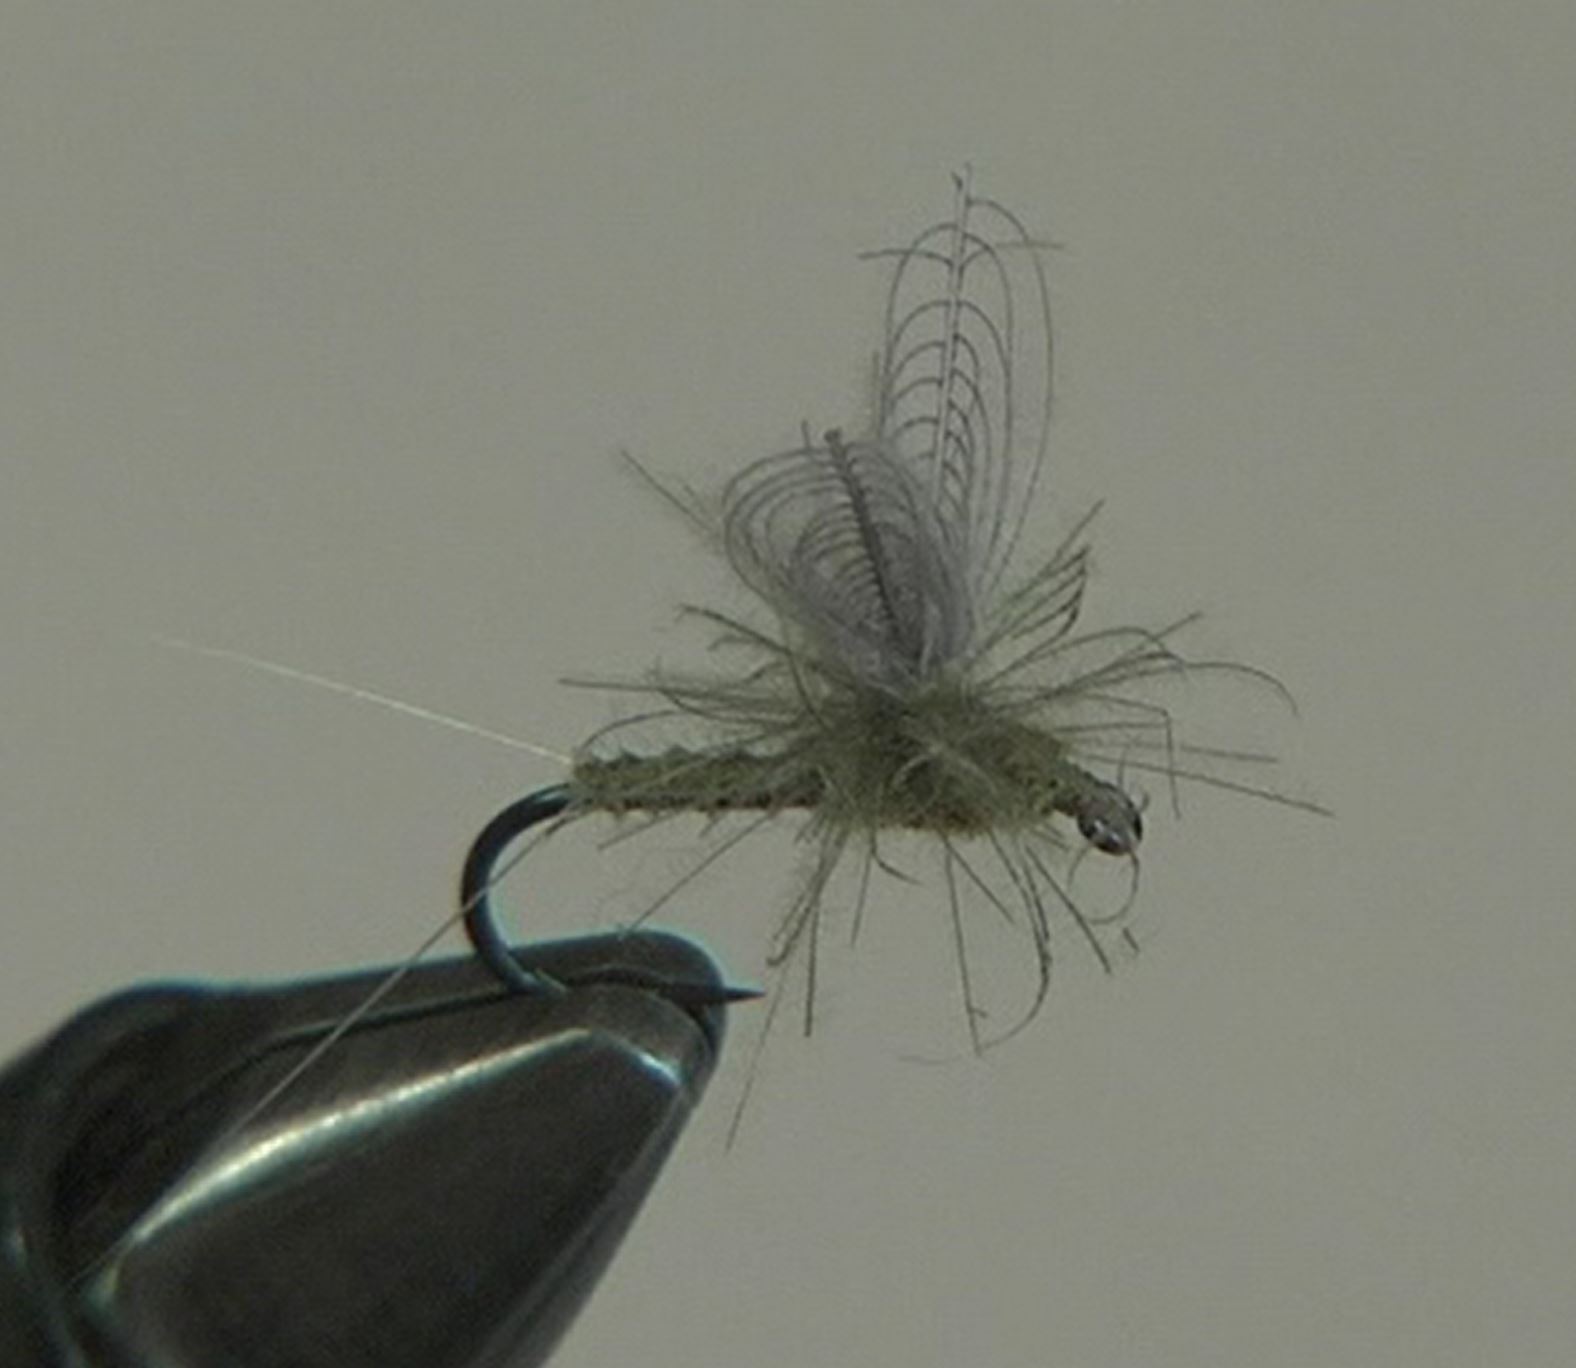 Troute flies for rivers flytying fly tying mouche eclosion